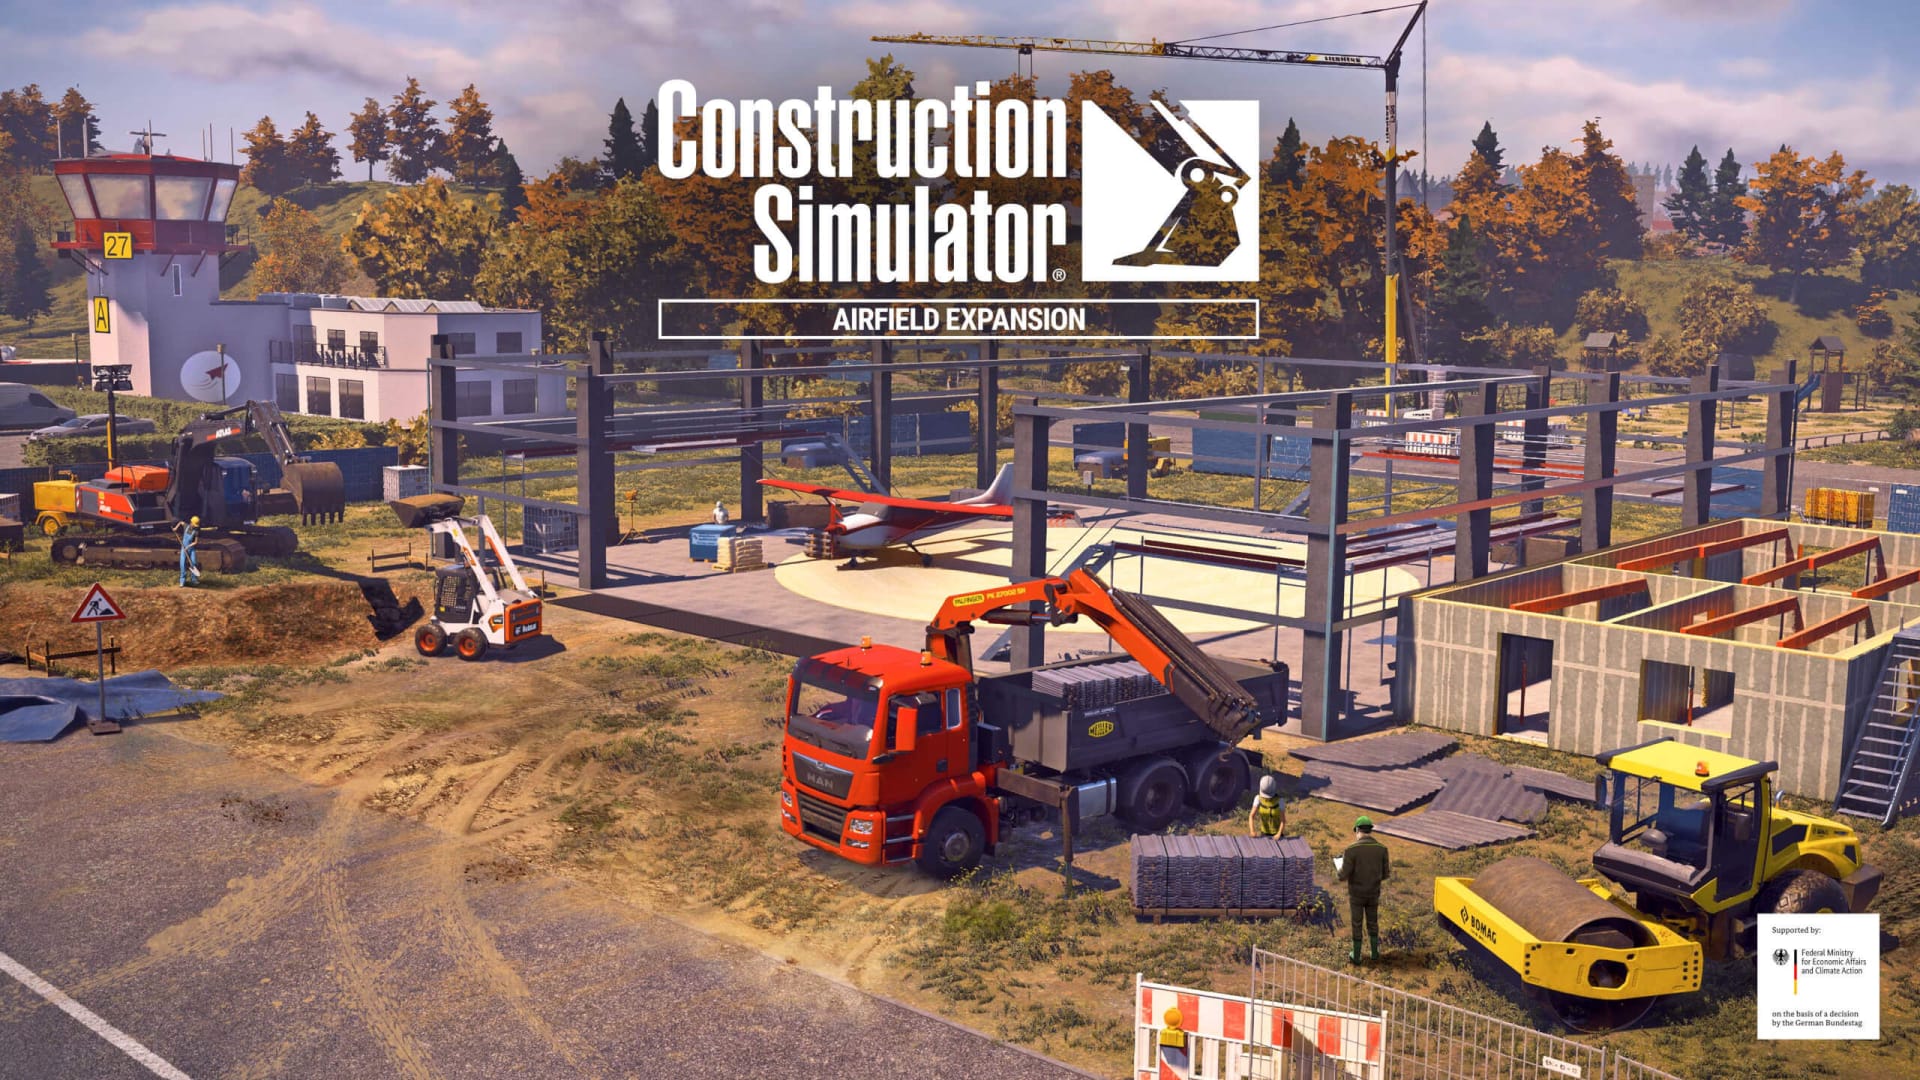 Construction Simulator Airfield Expansion Takes Flight Later This